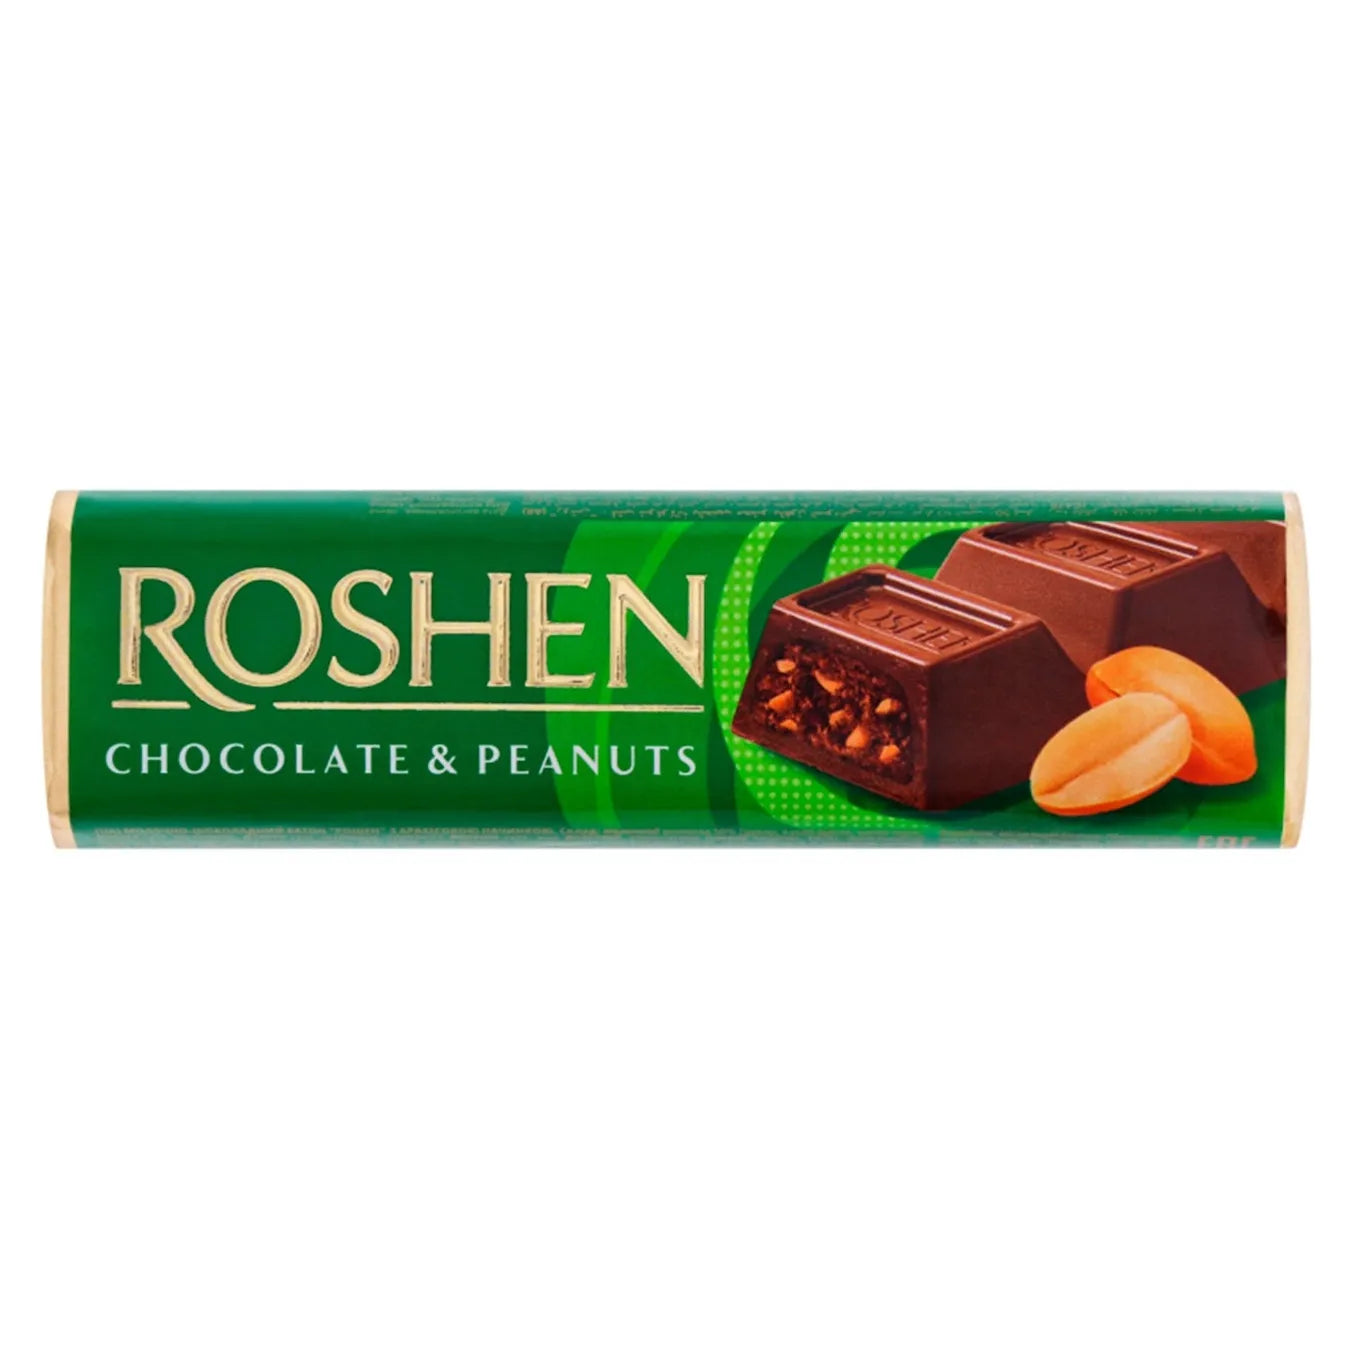 pack of Roshen Milk Chocolate Bar with Peanut Filling, 38g